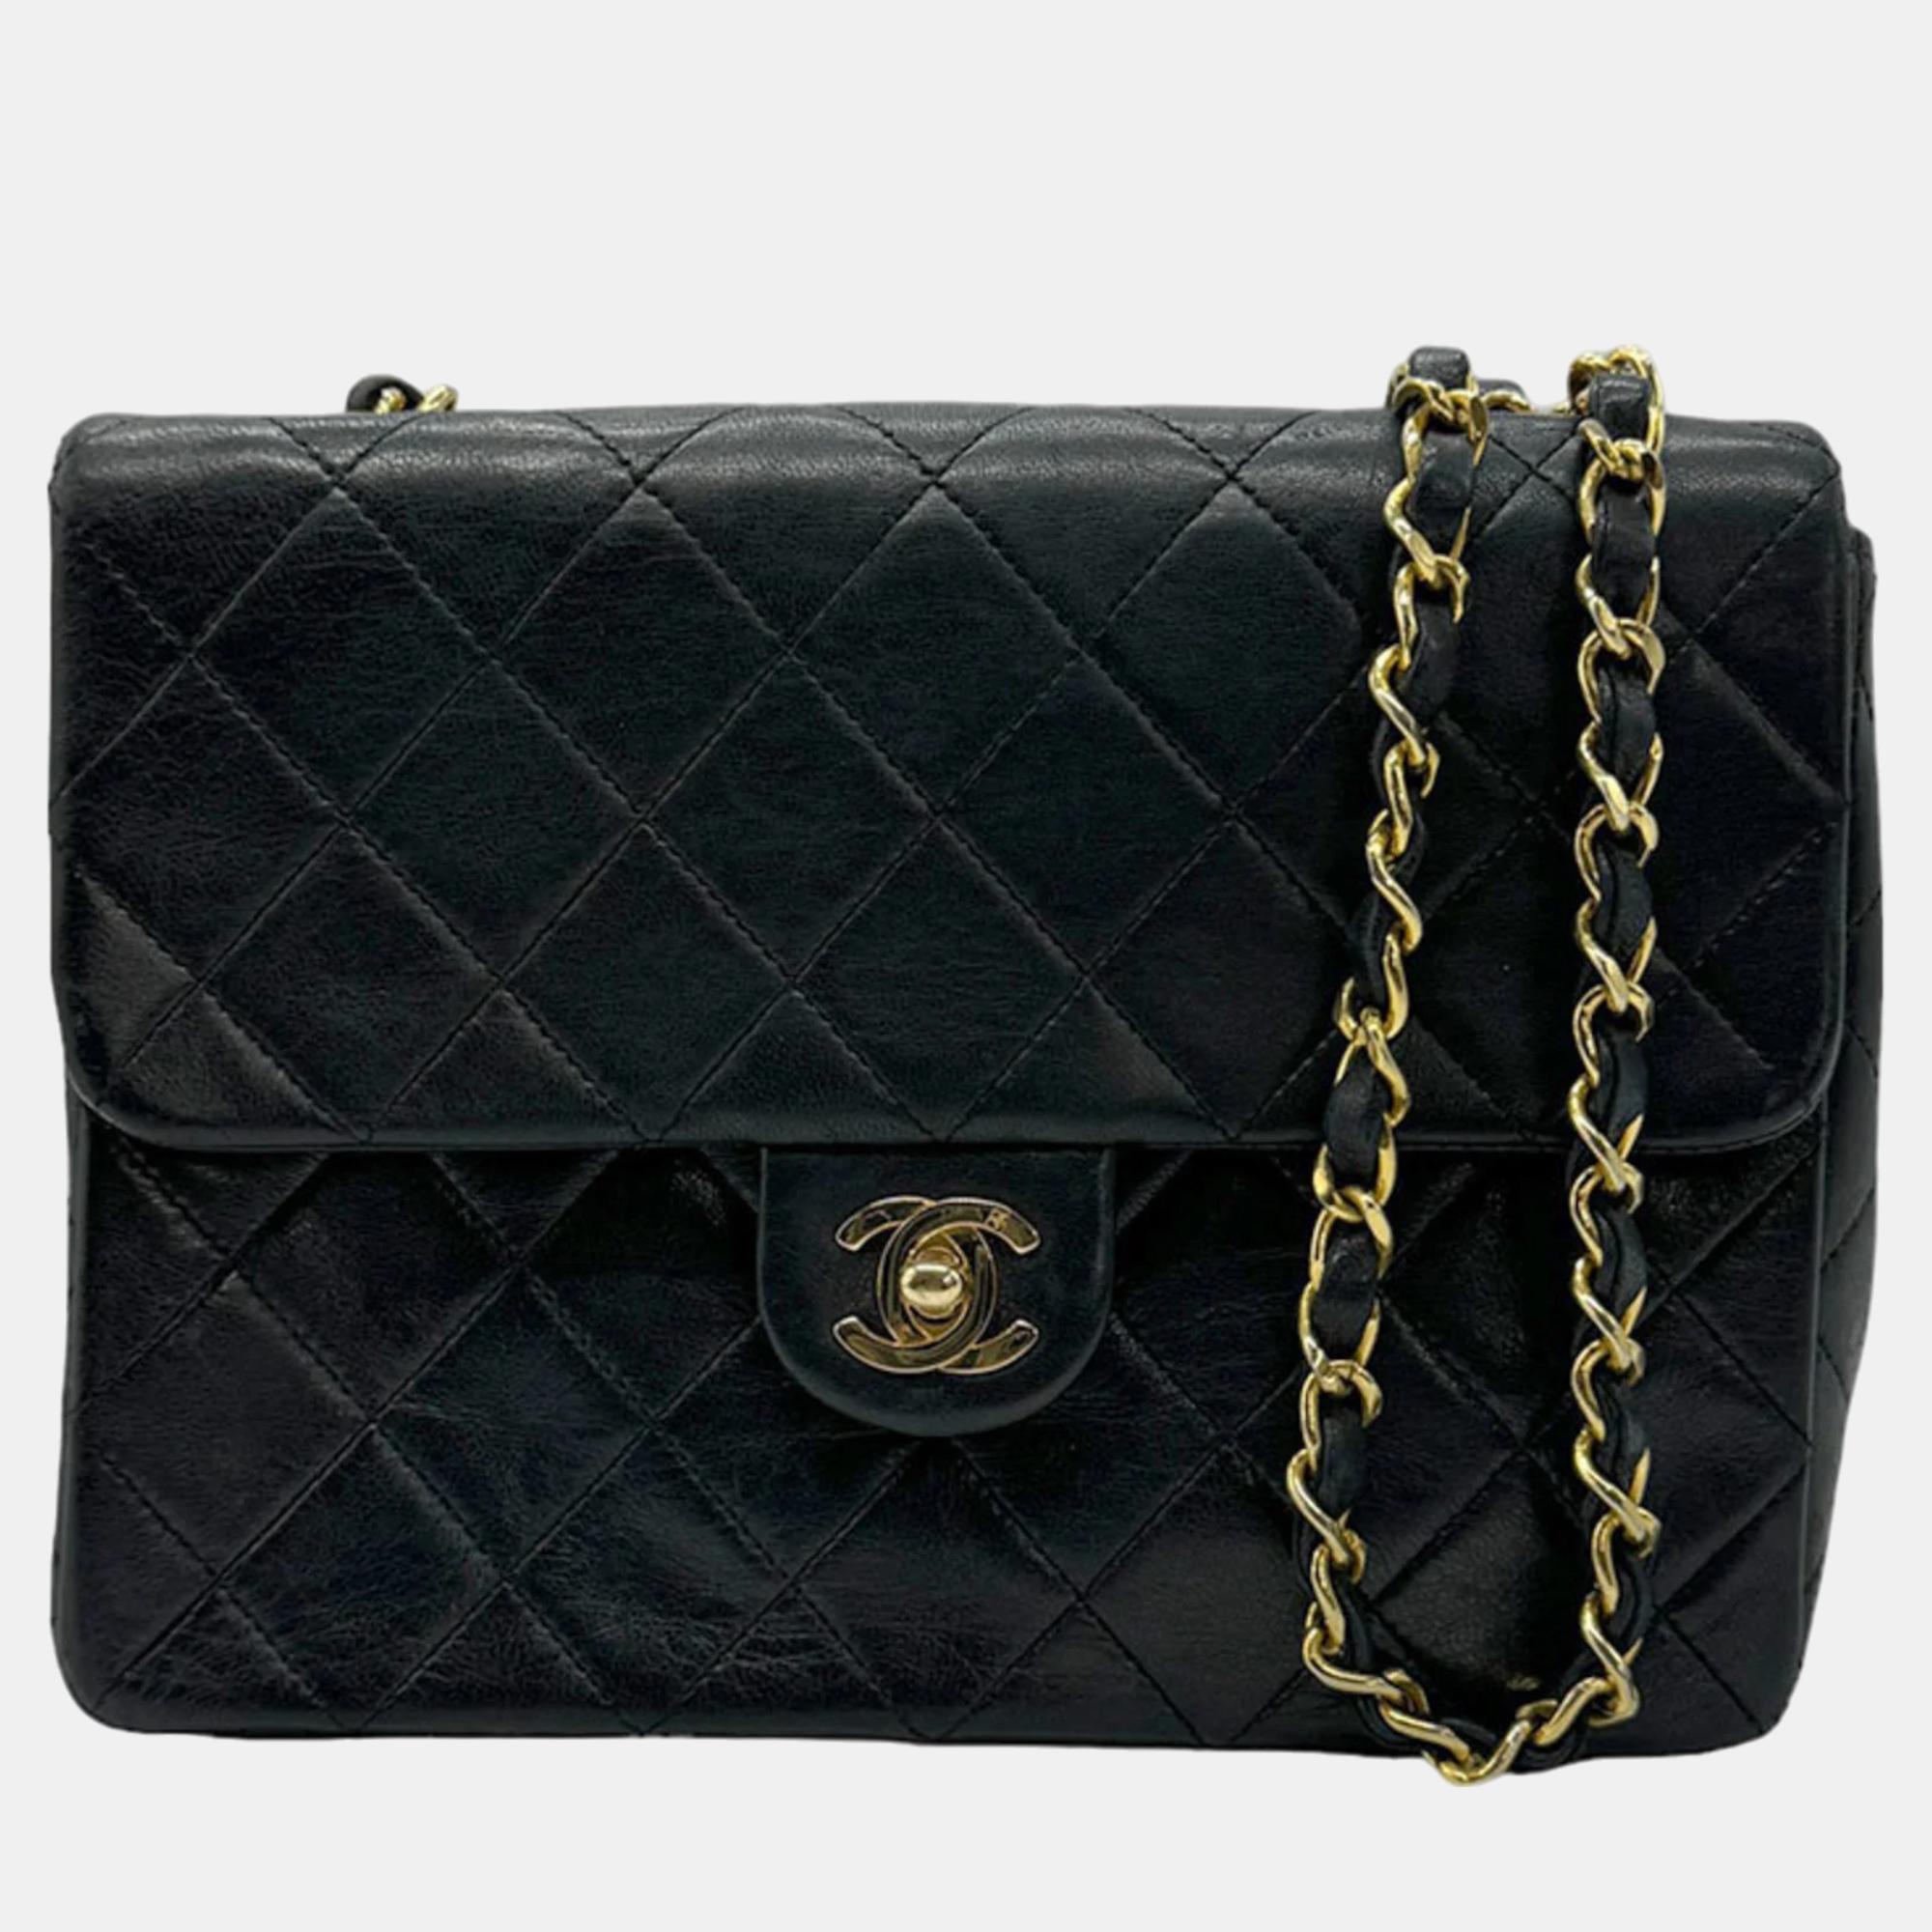 Chanel Black Lambskin Leather Small Vintage Classic Flap Bag